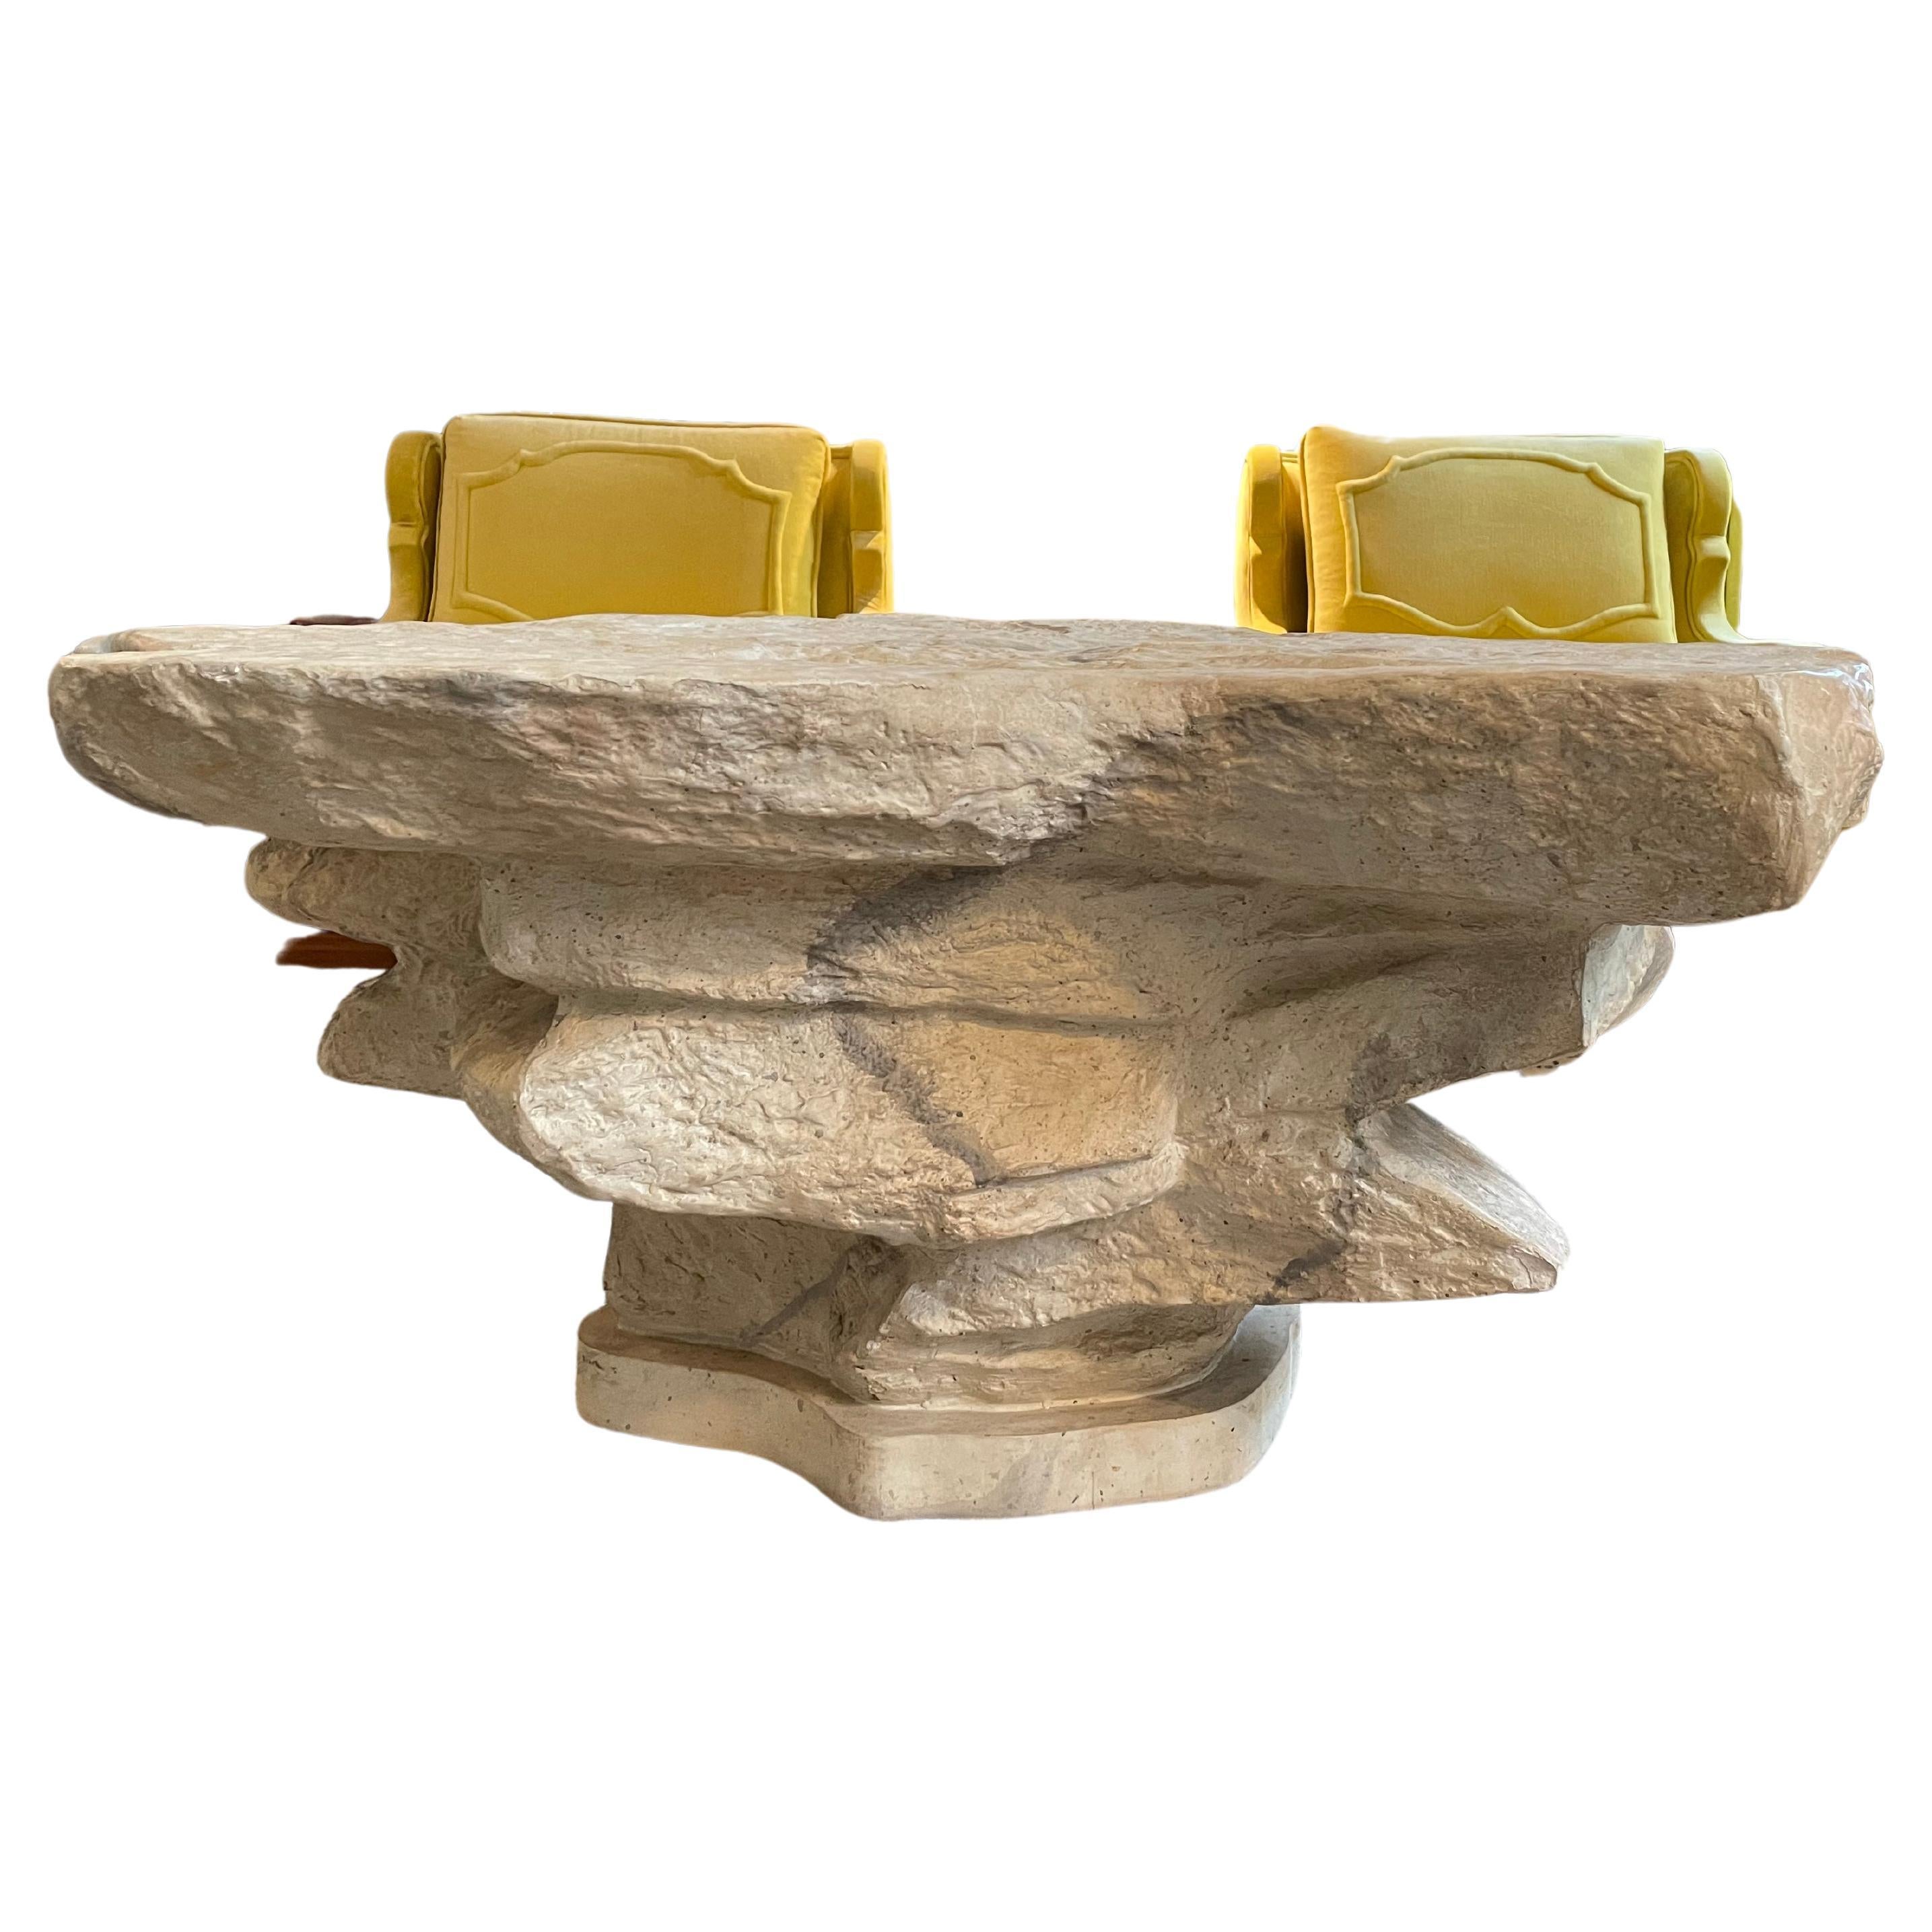 Highly Sought After - stunning stacked stone plaster coffee or drinks table in the manner of Emilio Terry. Lovely veining throughout this irregular shaped piece. Capturing Nature’s Beauty for function and design. From an estate in Sanford, Ct that